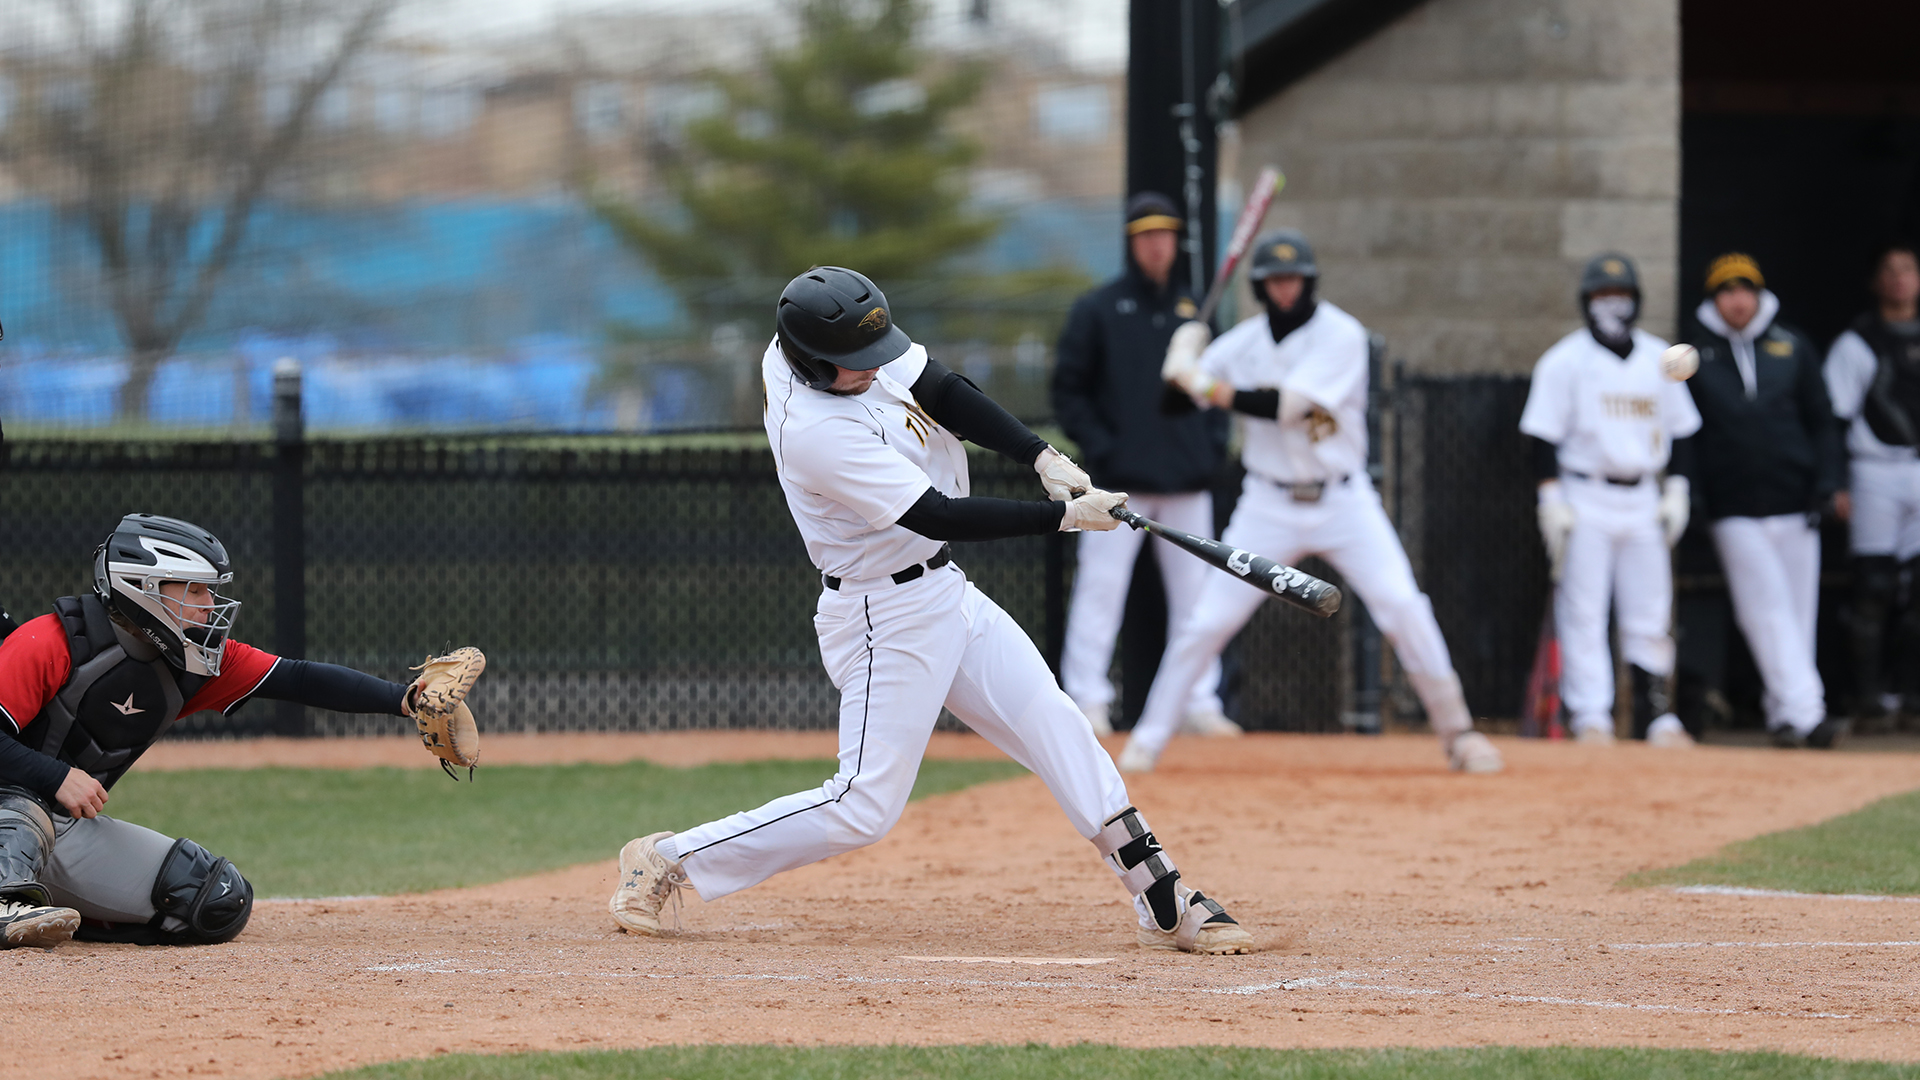 Zach Taylor hit his sixth and seventh home runs of the season against the Red Hawks.